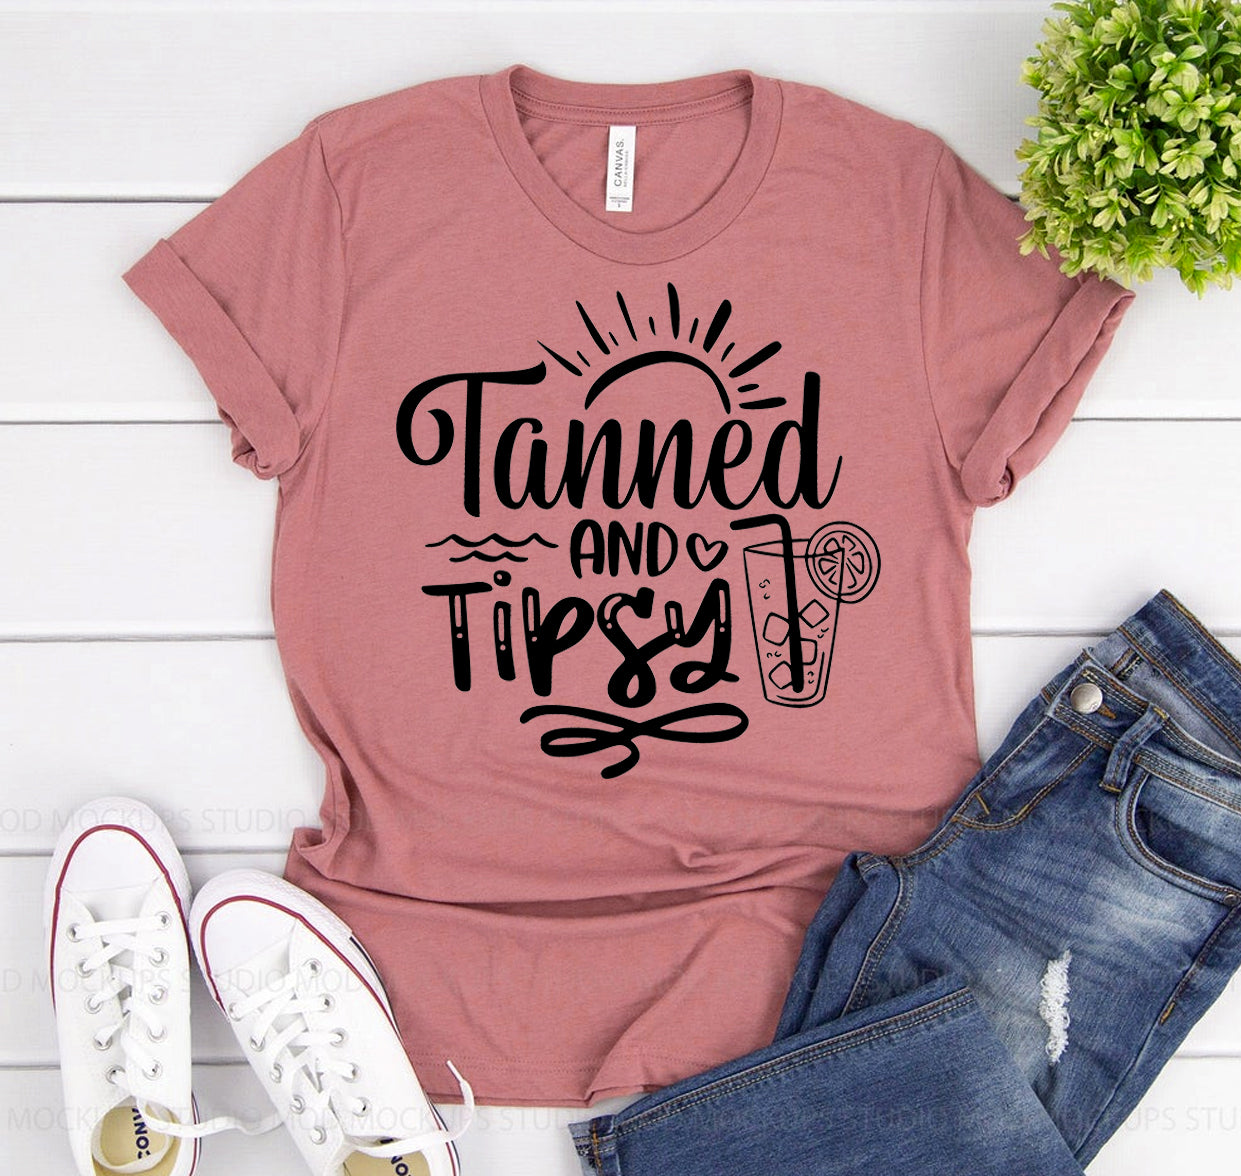 Tanned and Tipsy T-shirt